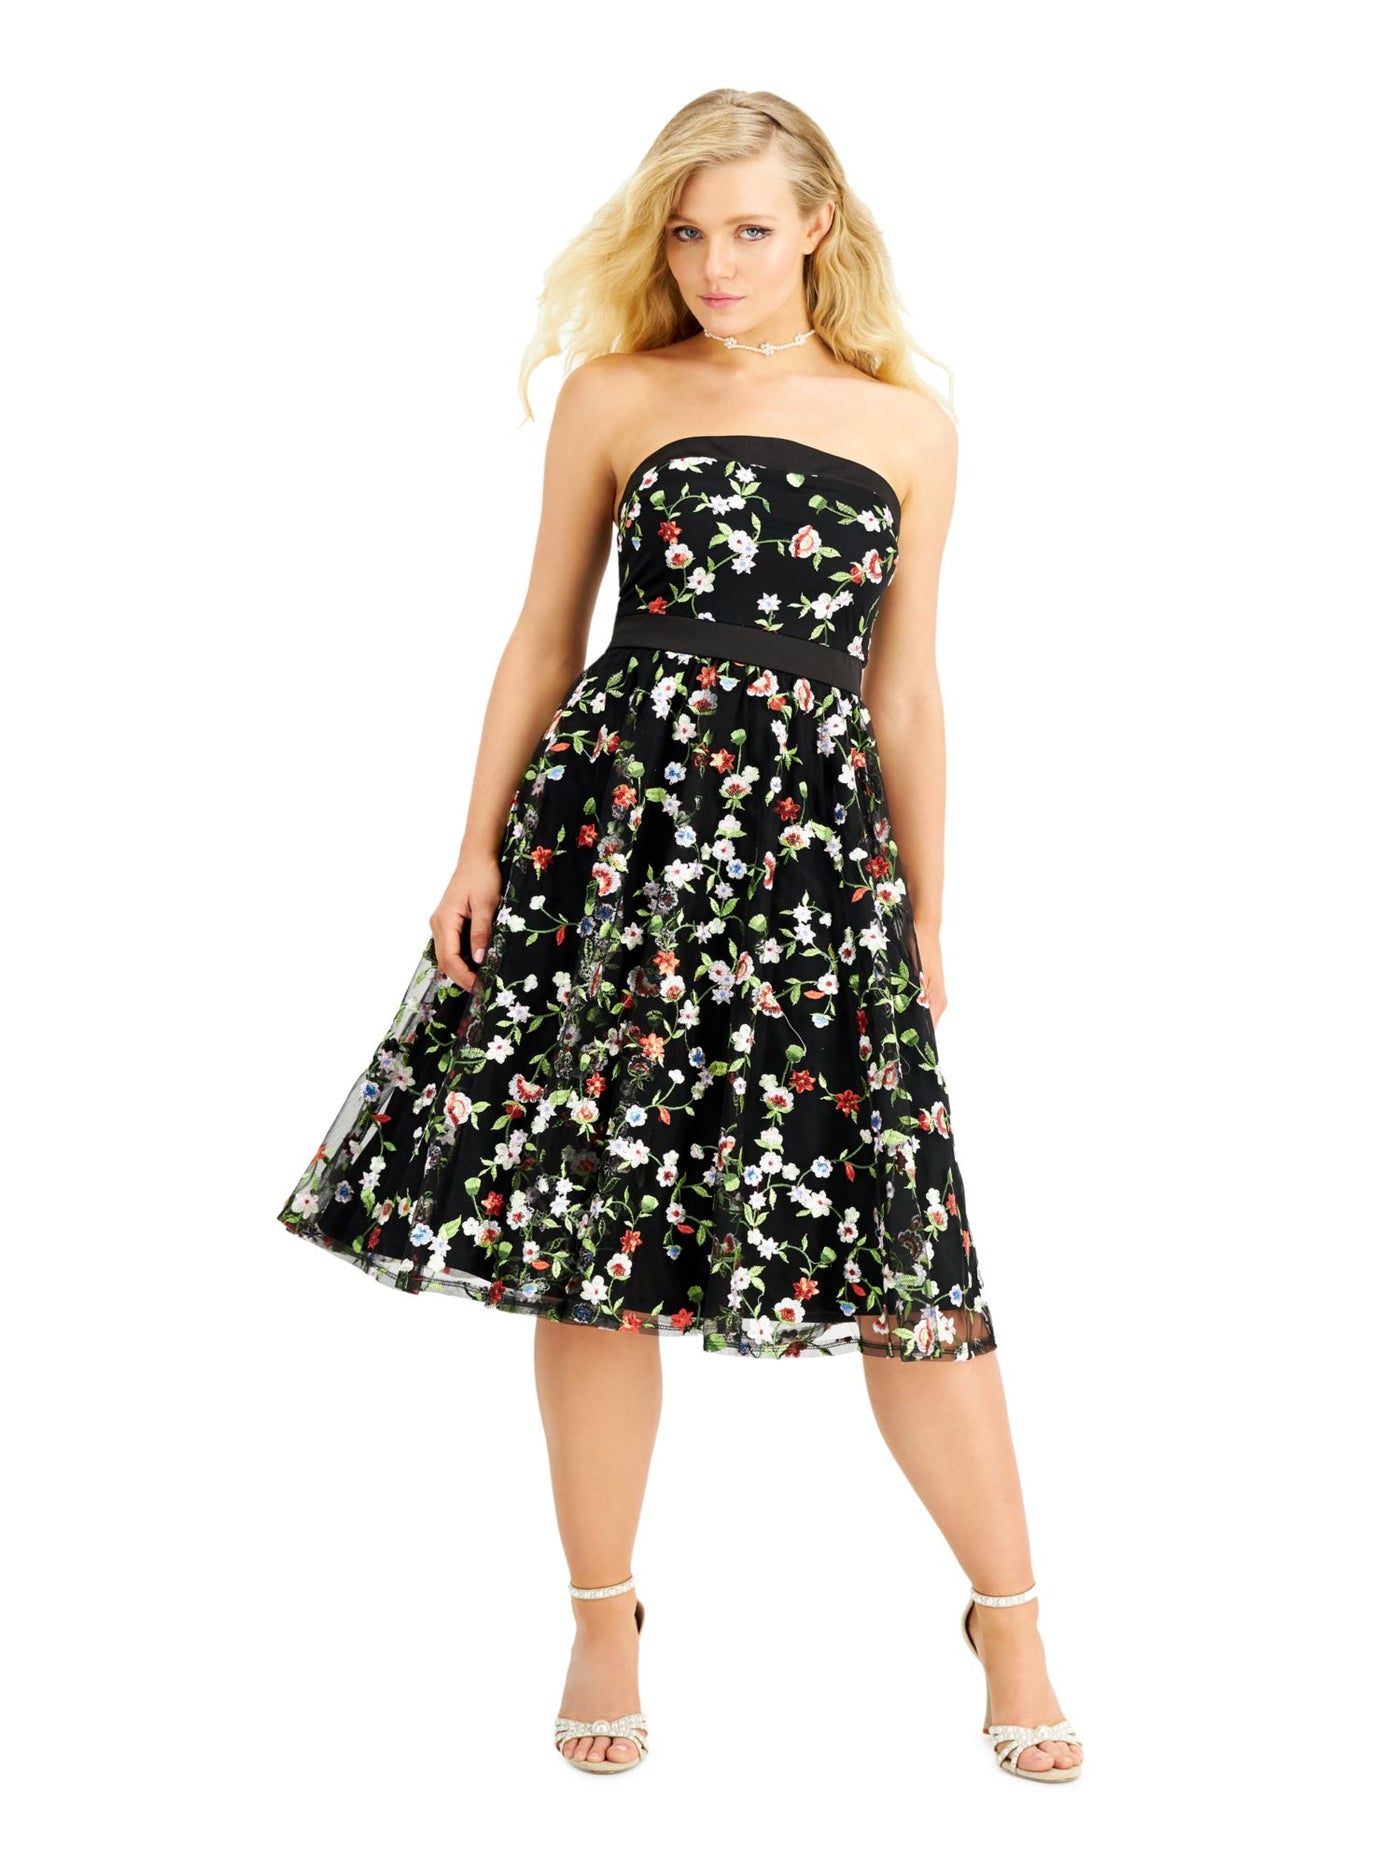 CITY STUDIO Womens Black Embroidered Satin Accent Floral Strapless Midi Party Fit + Flare Dress Juniors 0